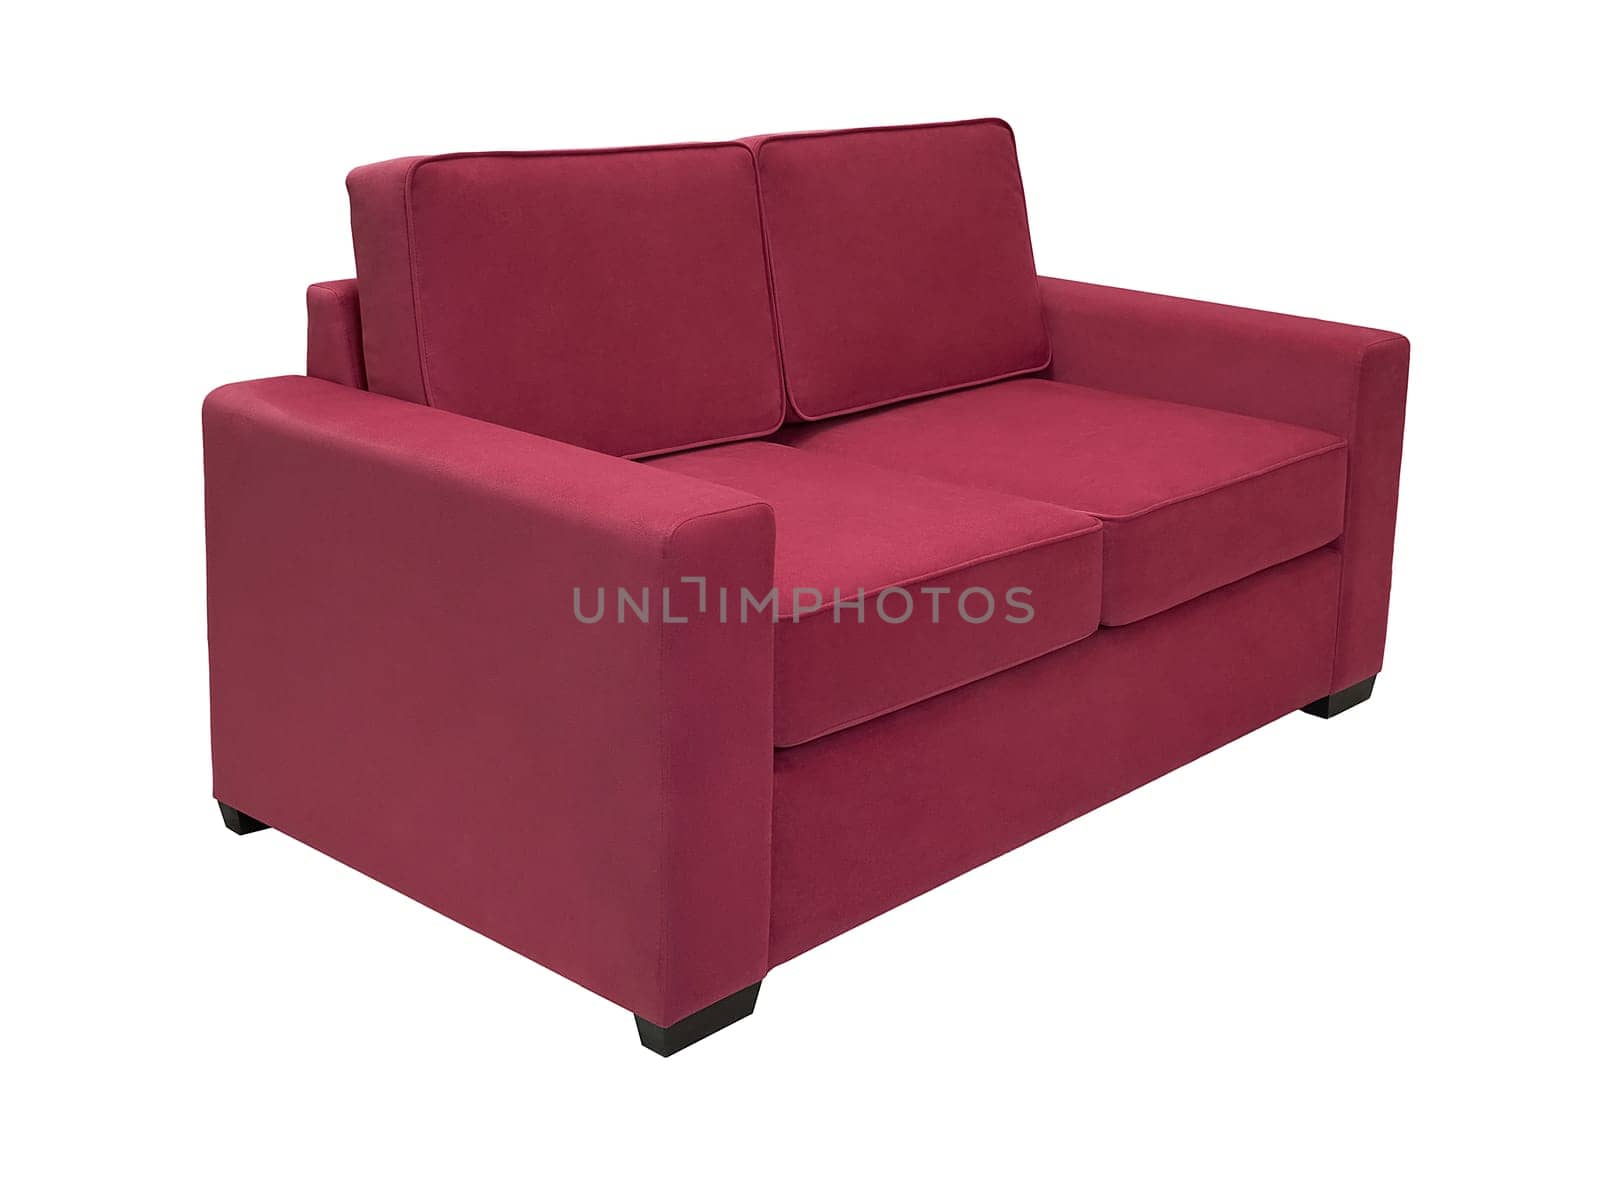 vintage crimson fabric sofa isolated on white background, side view. retro couch, furniture in minimal style, interior, home design